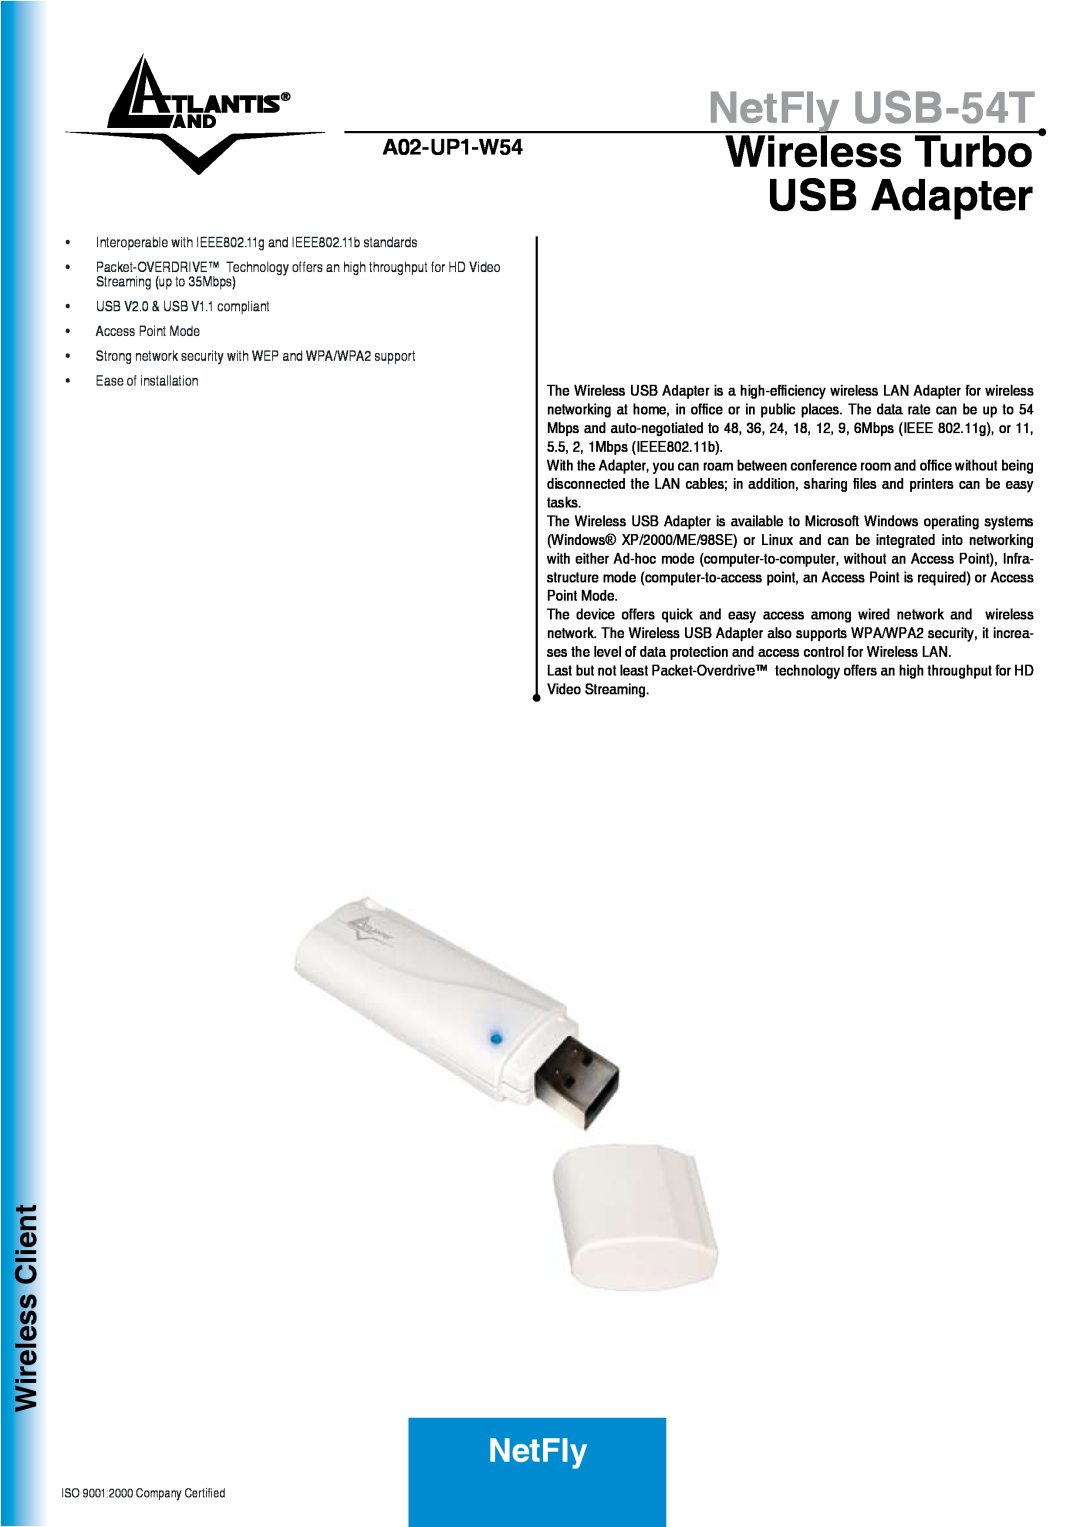 Atlantis Land manual NetFly USB-54T, A02-UP1-W54Wireless Turbo USB Adapter, Ease of installation, Wireless Client 